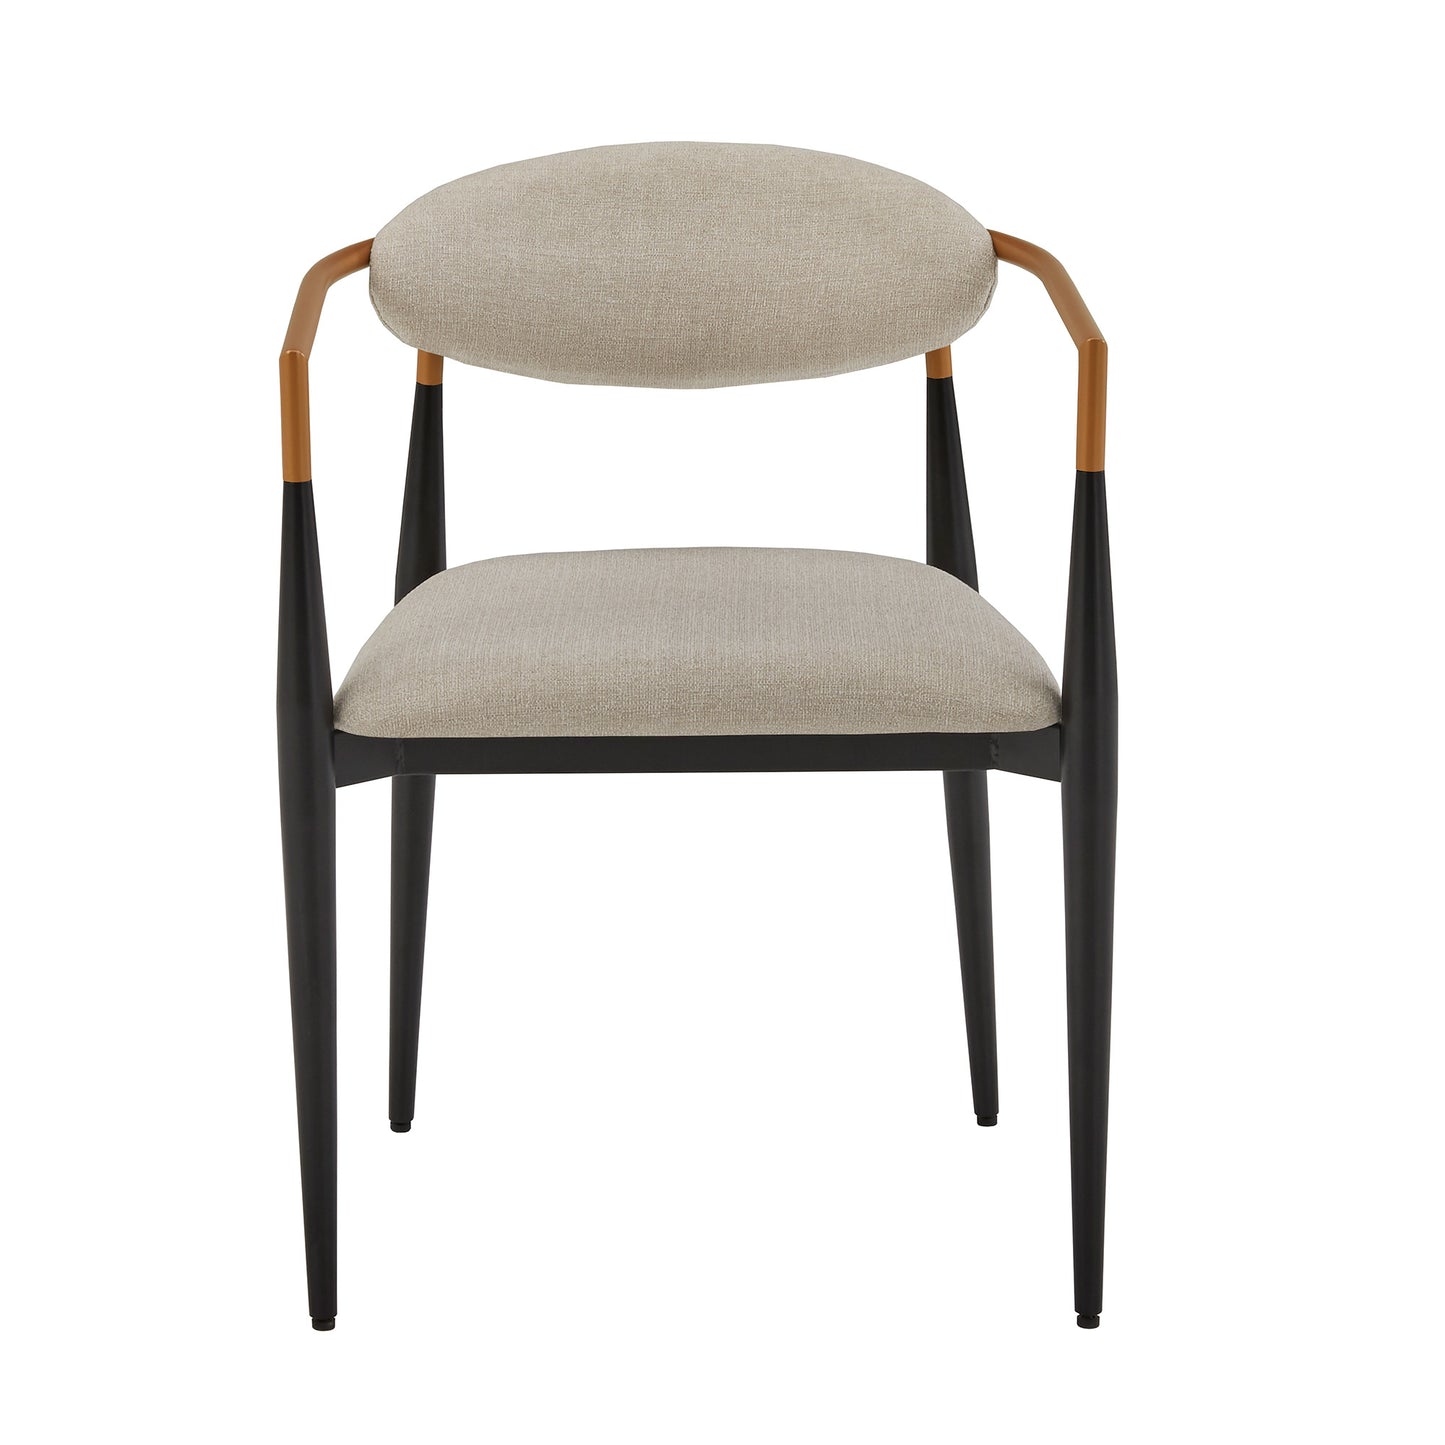 Mid-century Modern Dining Chair with Two-tone Copper & Black Finish (Set of 2) - Beige